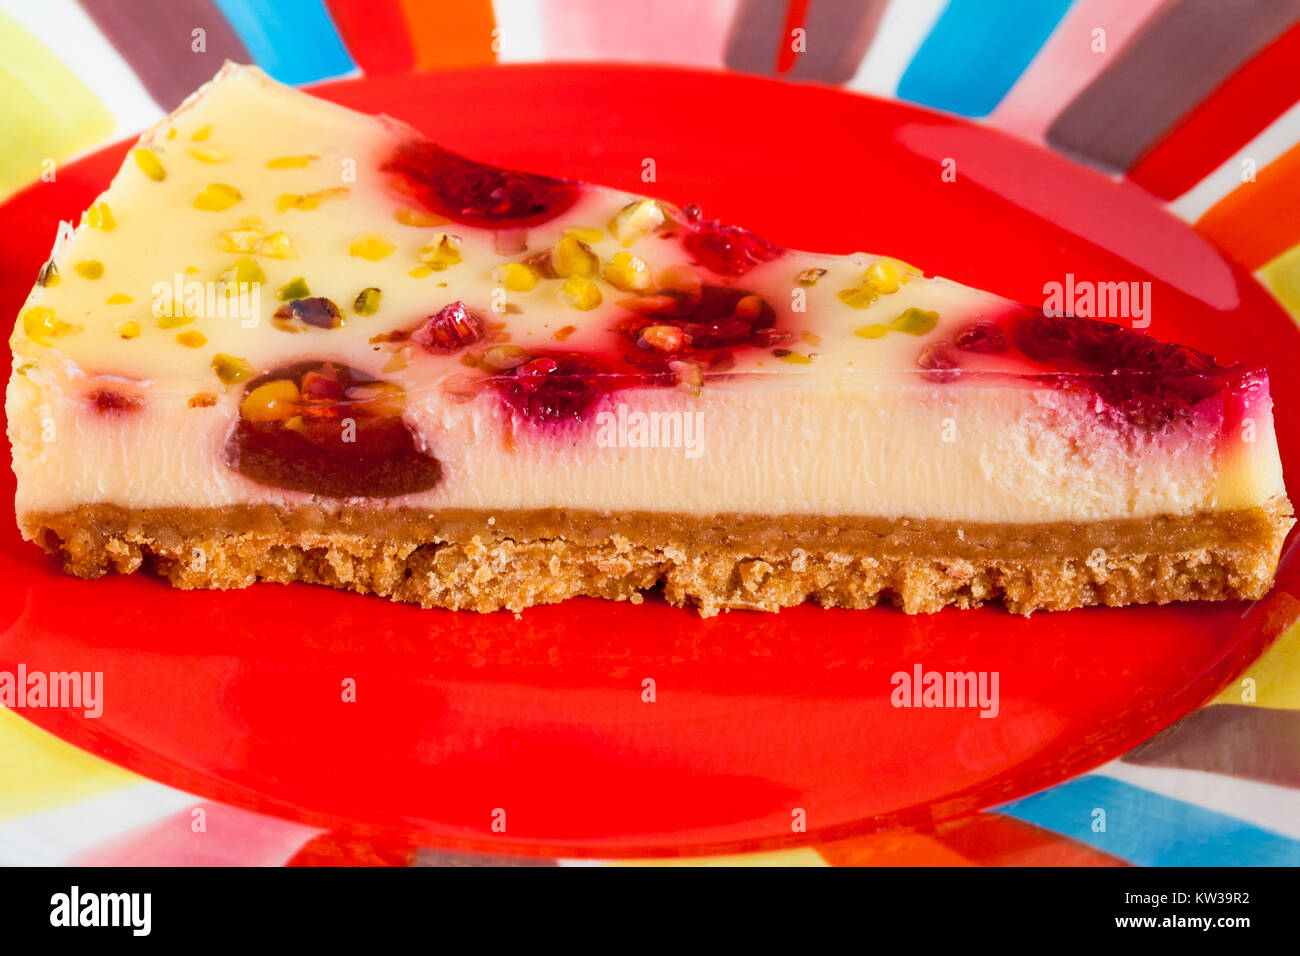 Tesco finest Raspberry & Pistachio cheesecake slice on red colourful plate Stock Photo